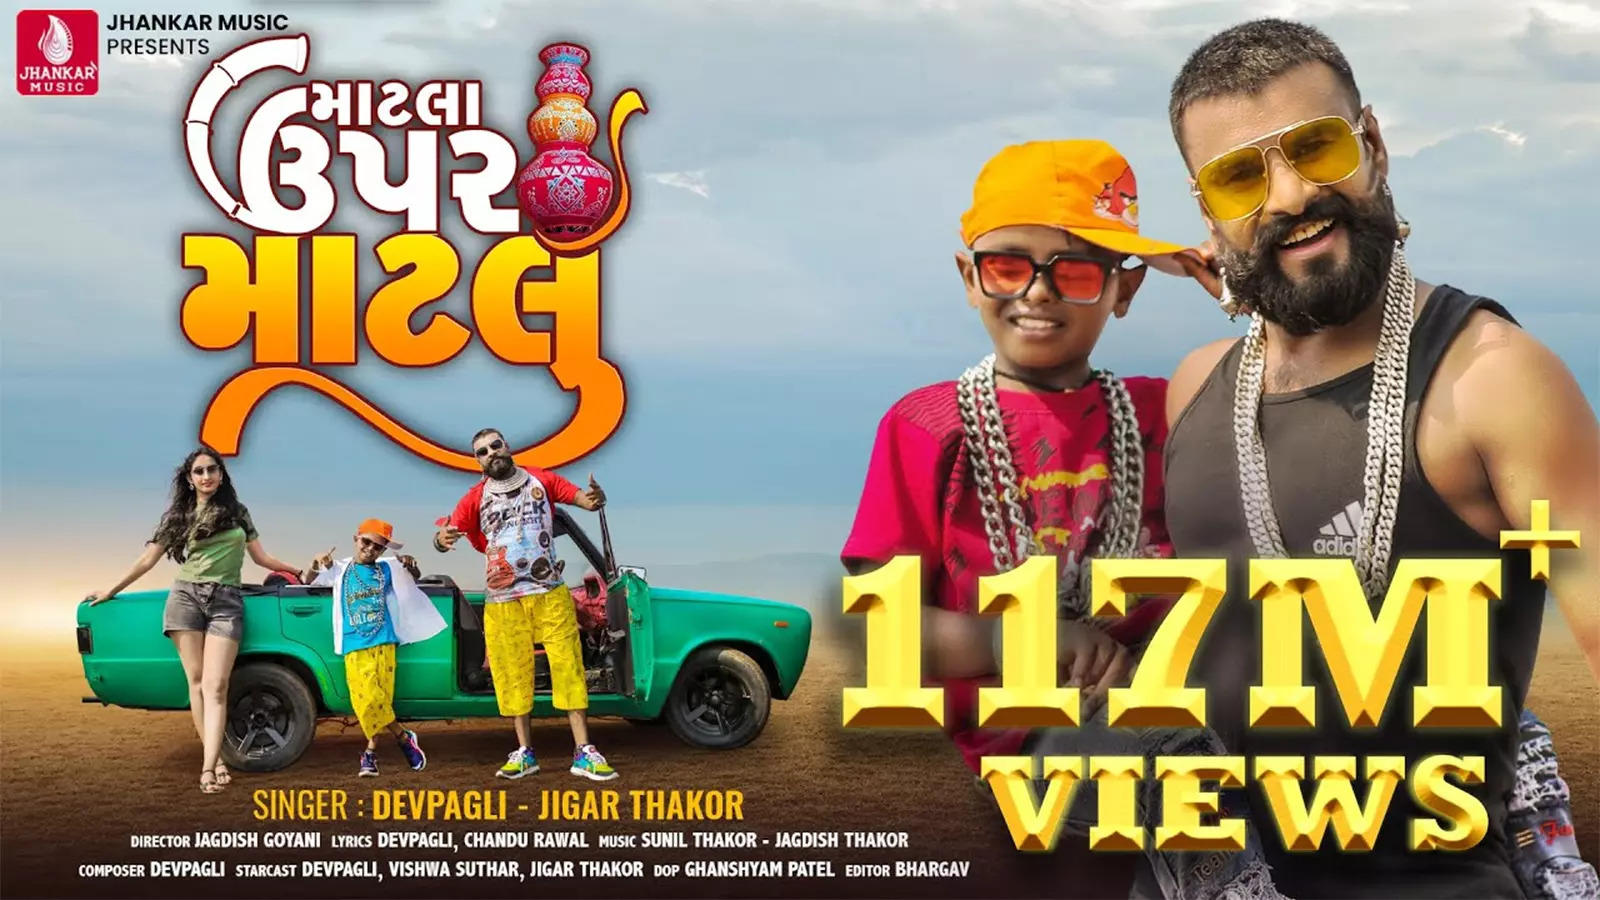 Check Out Popular Gujarati Song Music Video - 'Matla Upar Matlu' Sung By  Devpagli And Jigar Thakor | Gujarati Video Songs - Times of India